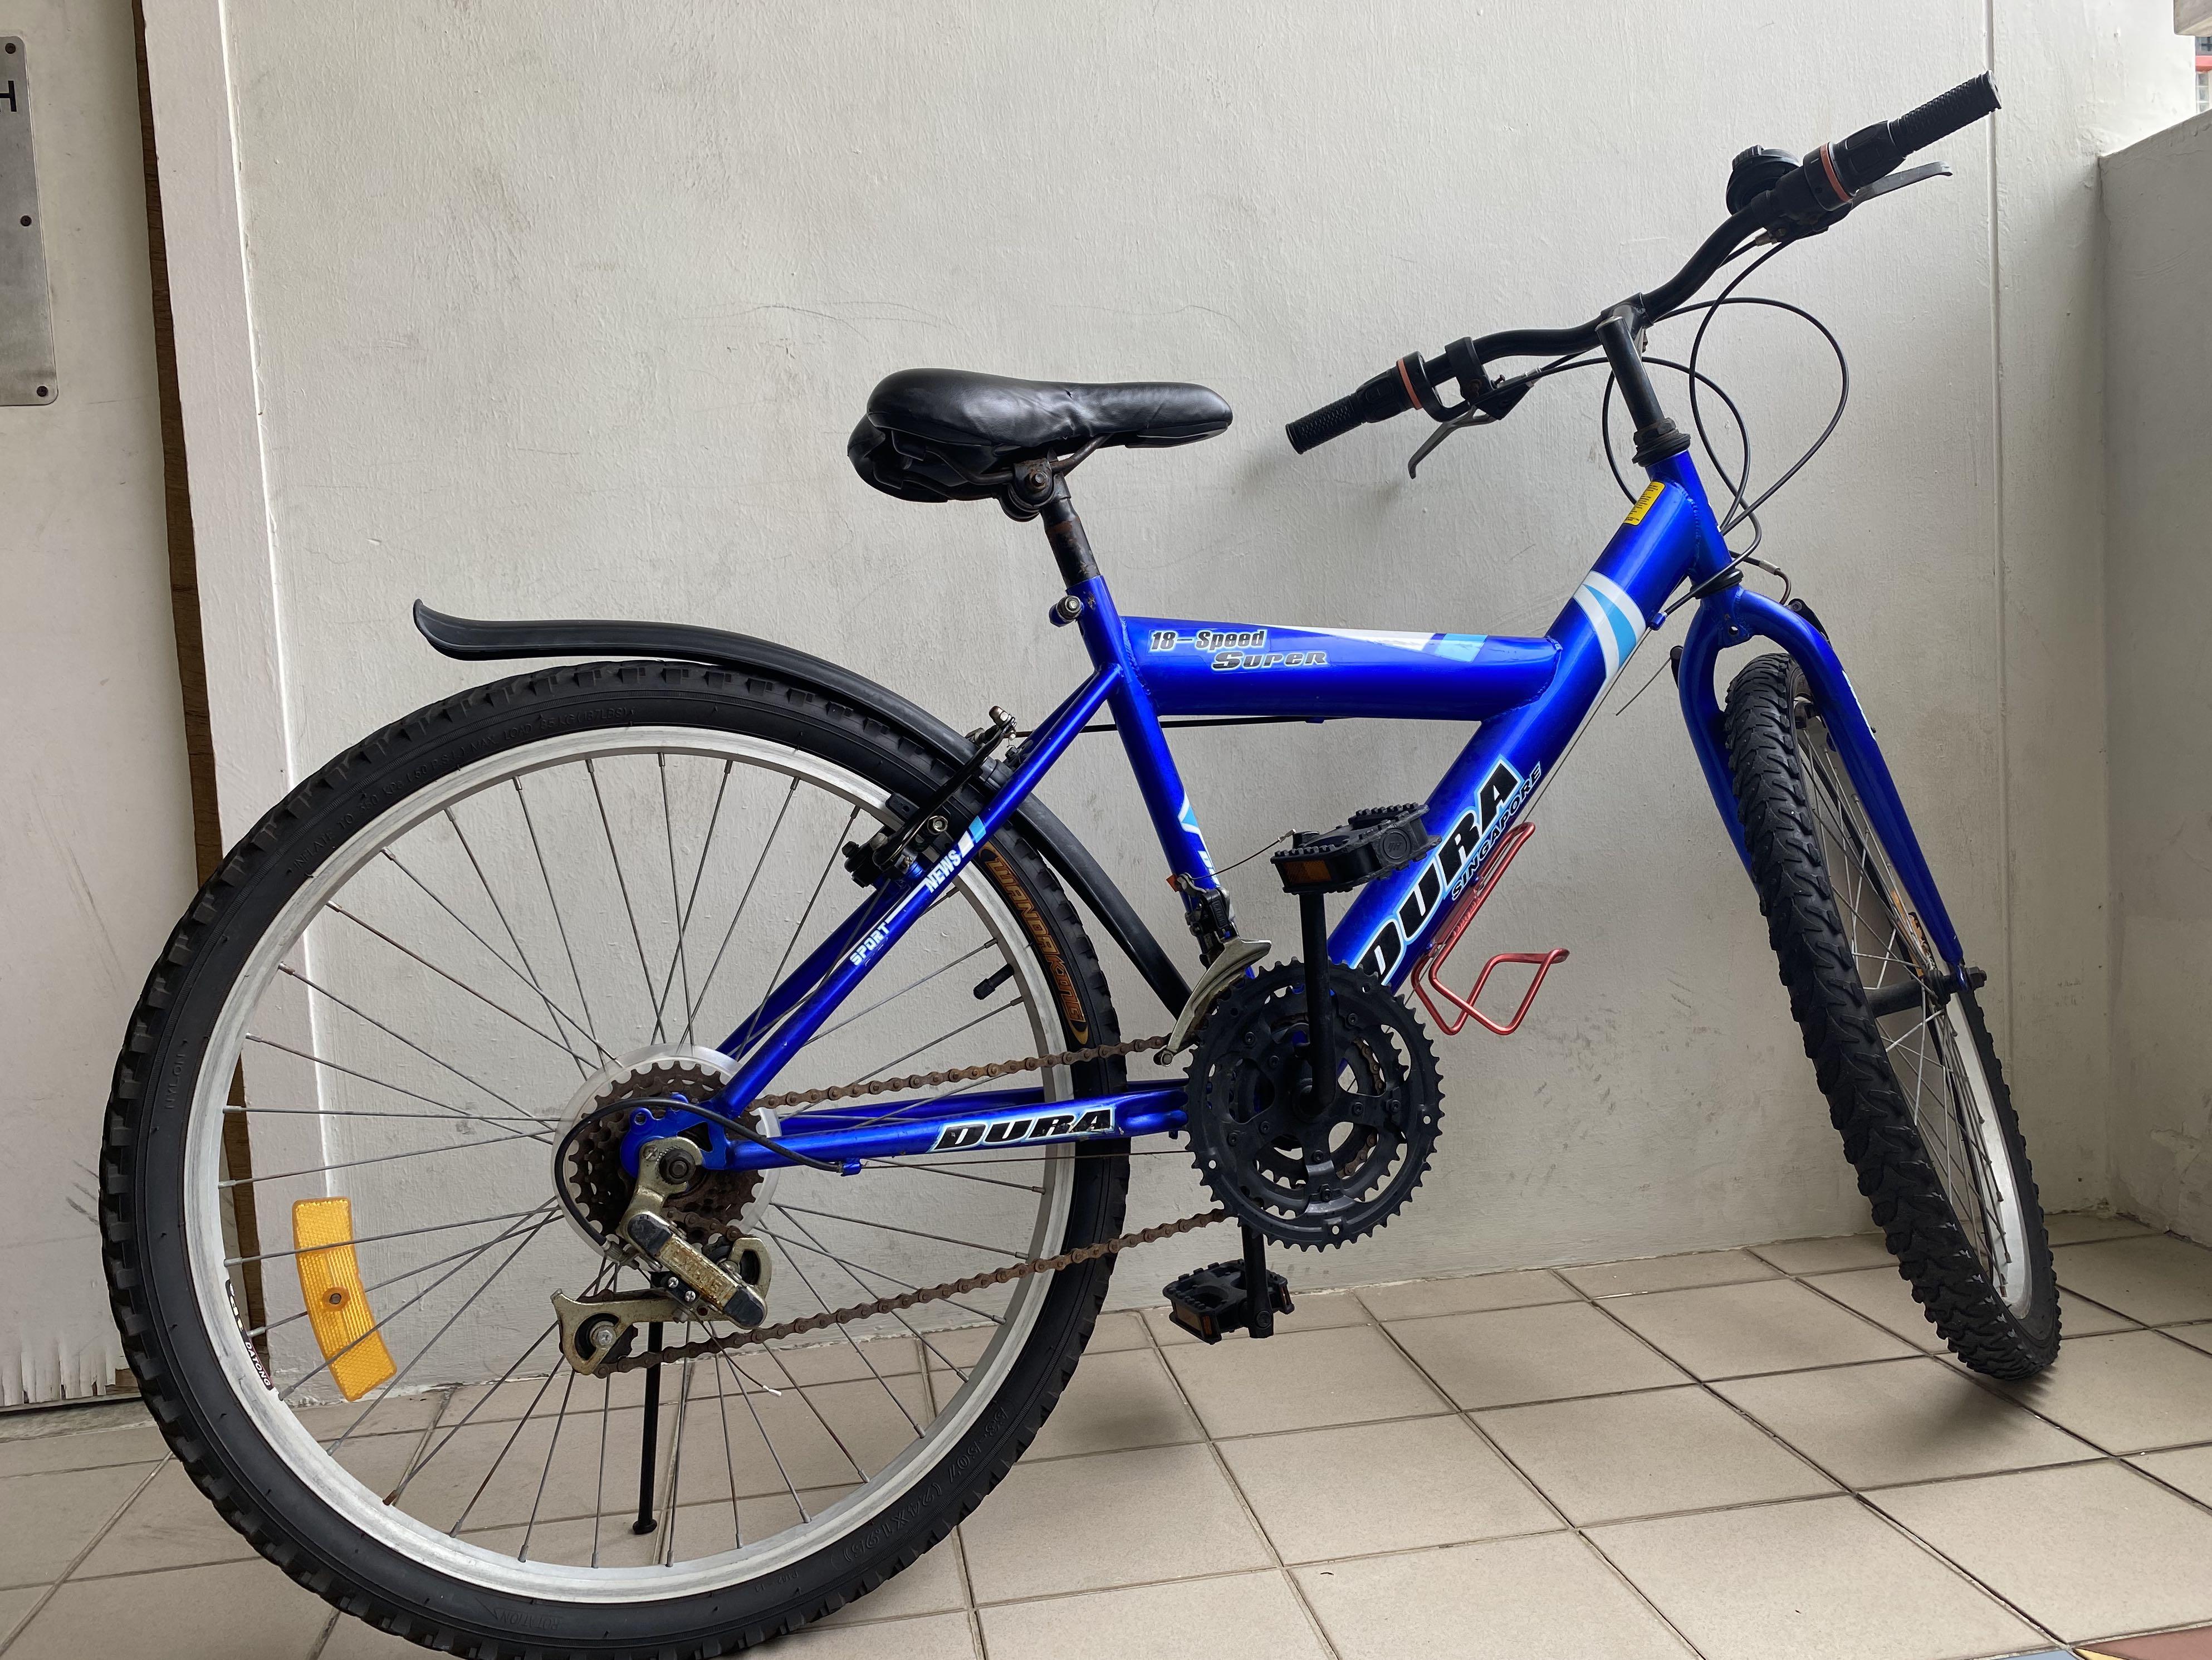 Used good condition bicycle, Bicycles 